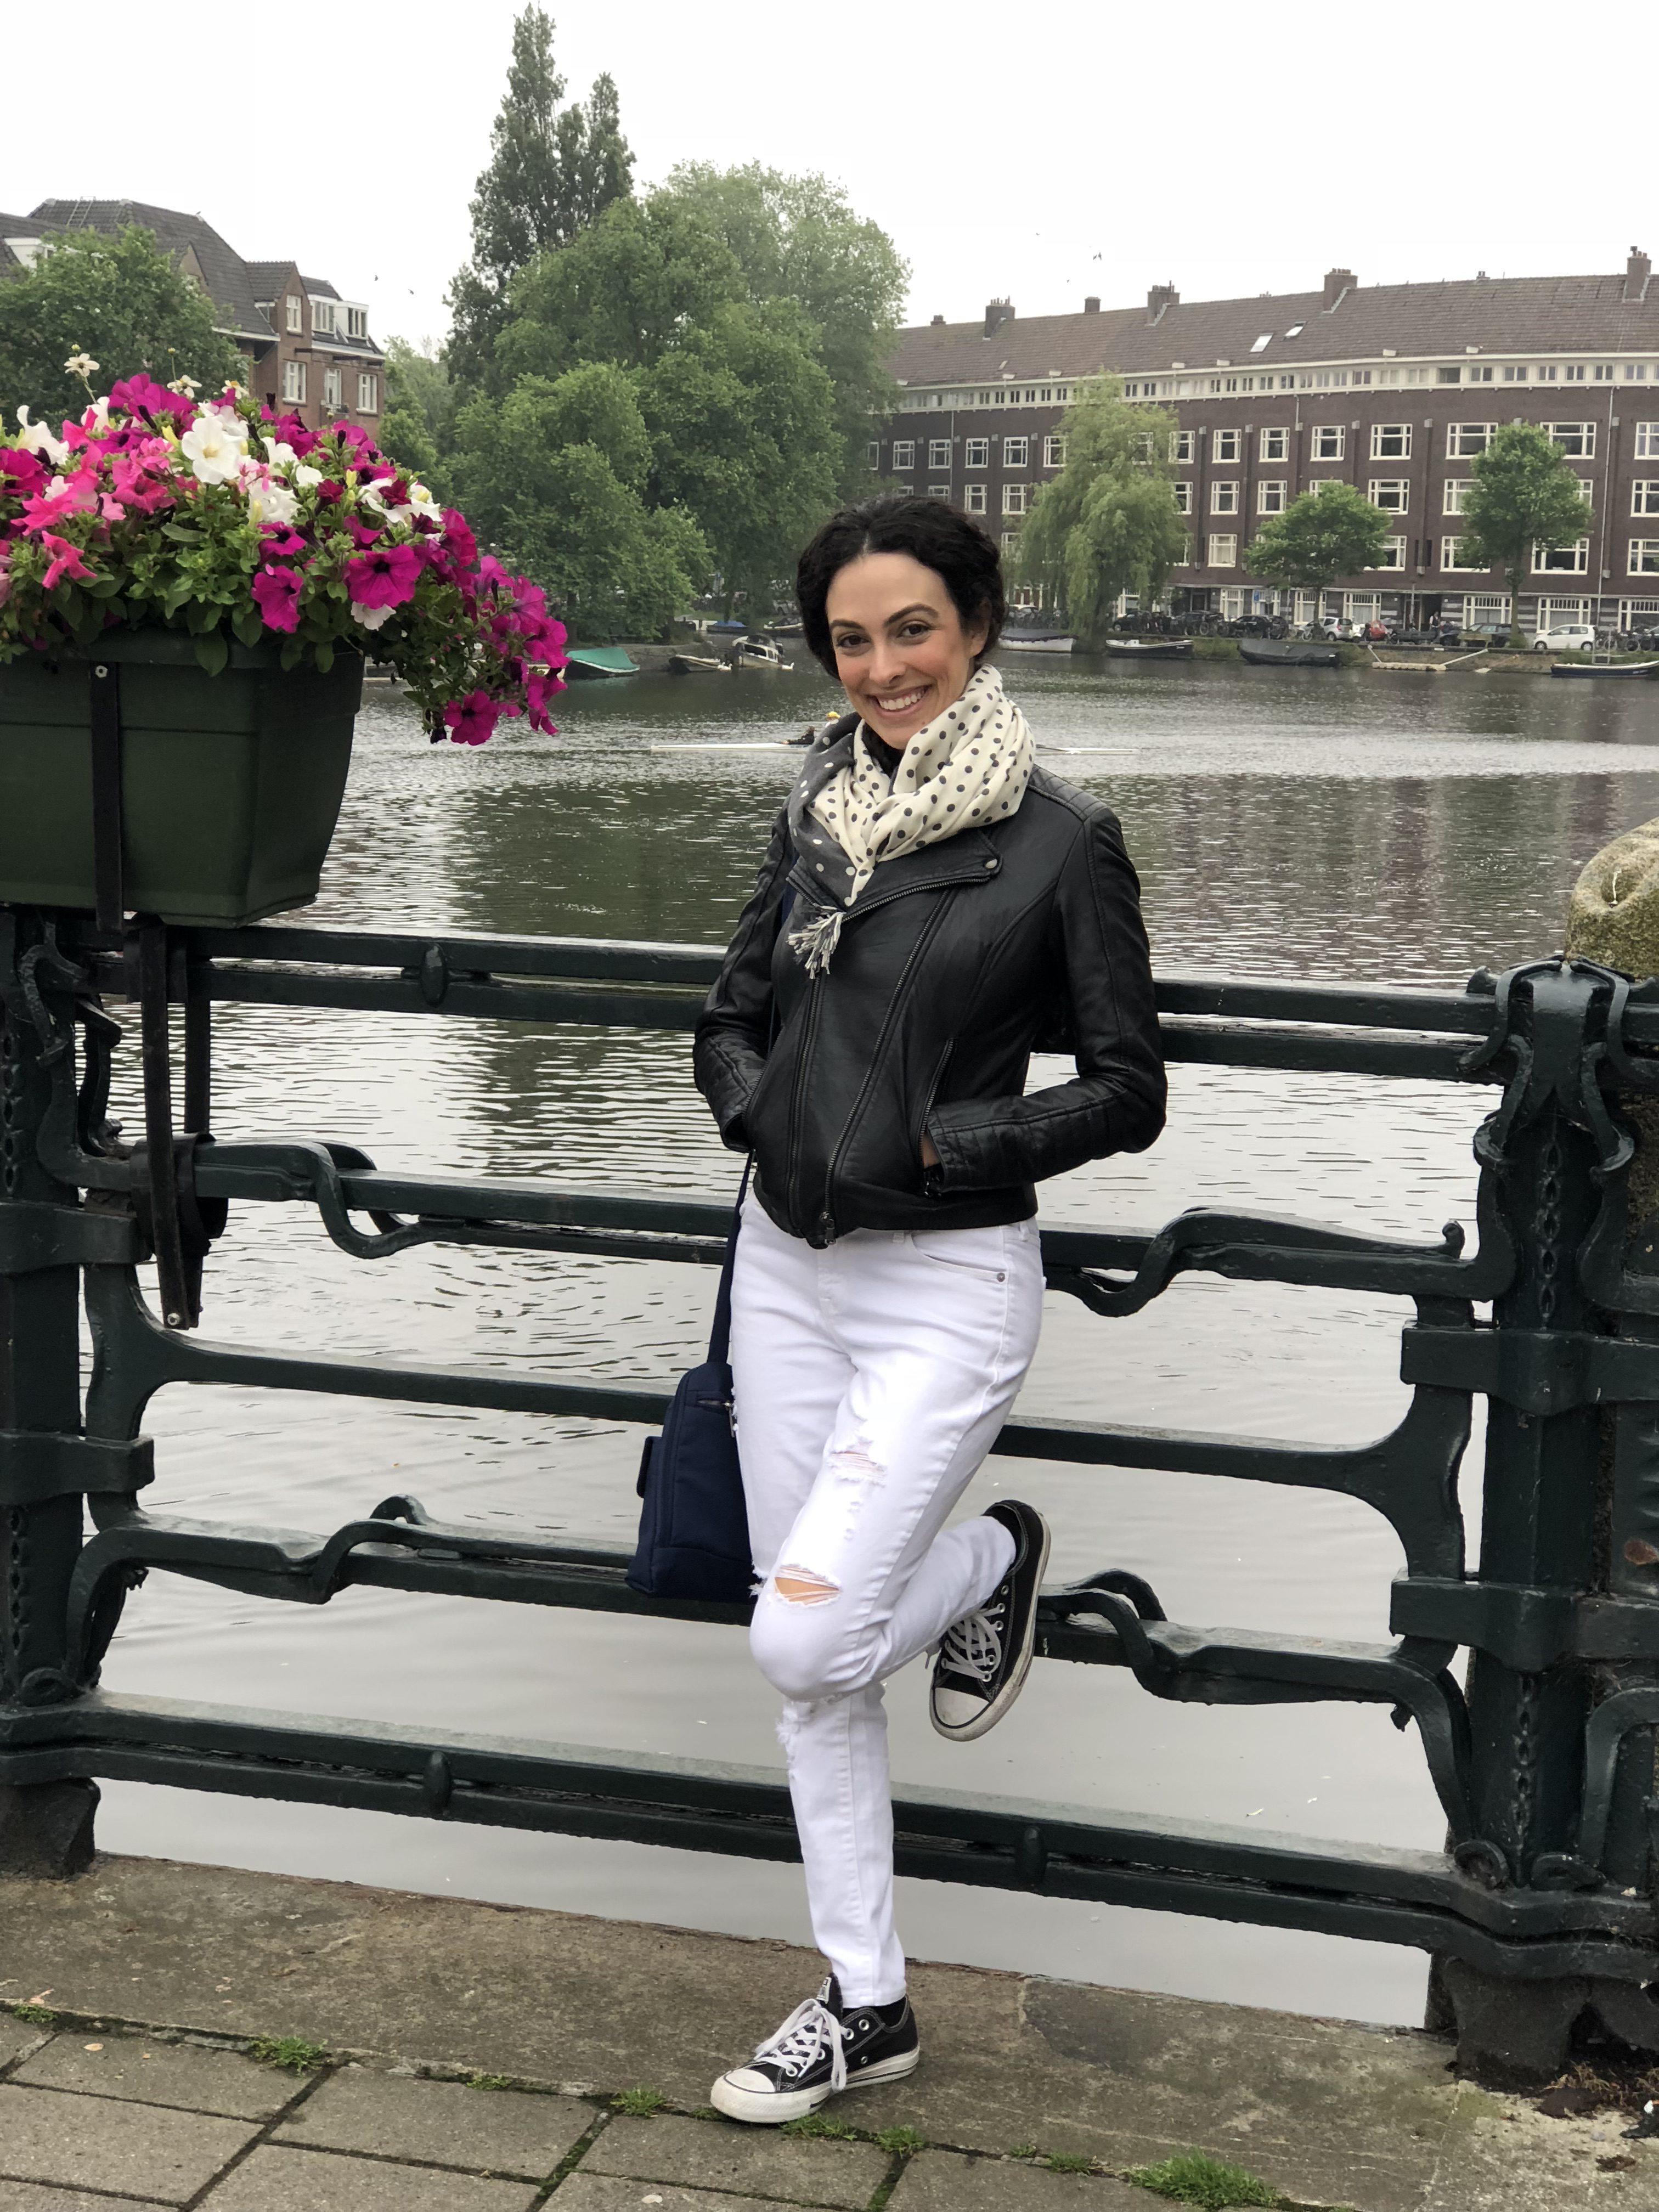 FODMAp travels - Amsterdam Travel Guide outside the canal